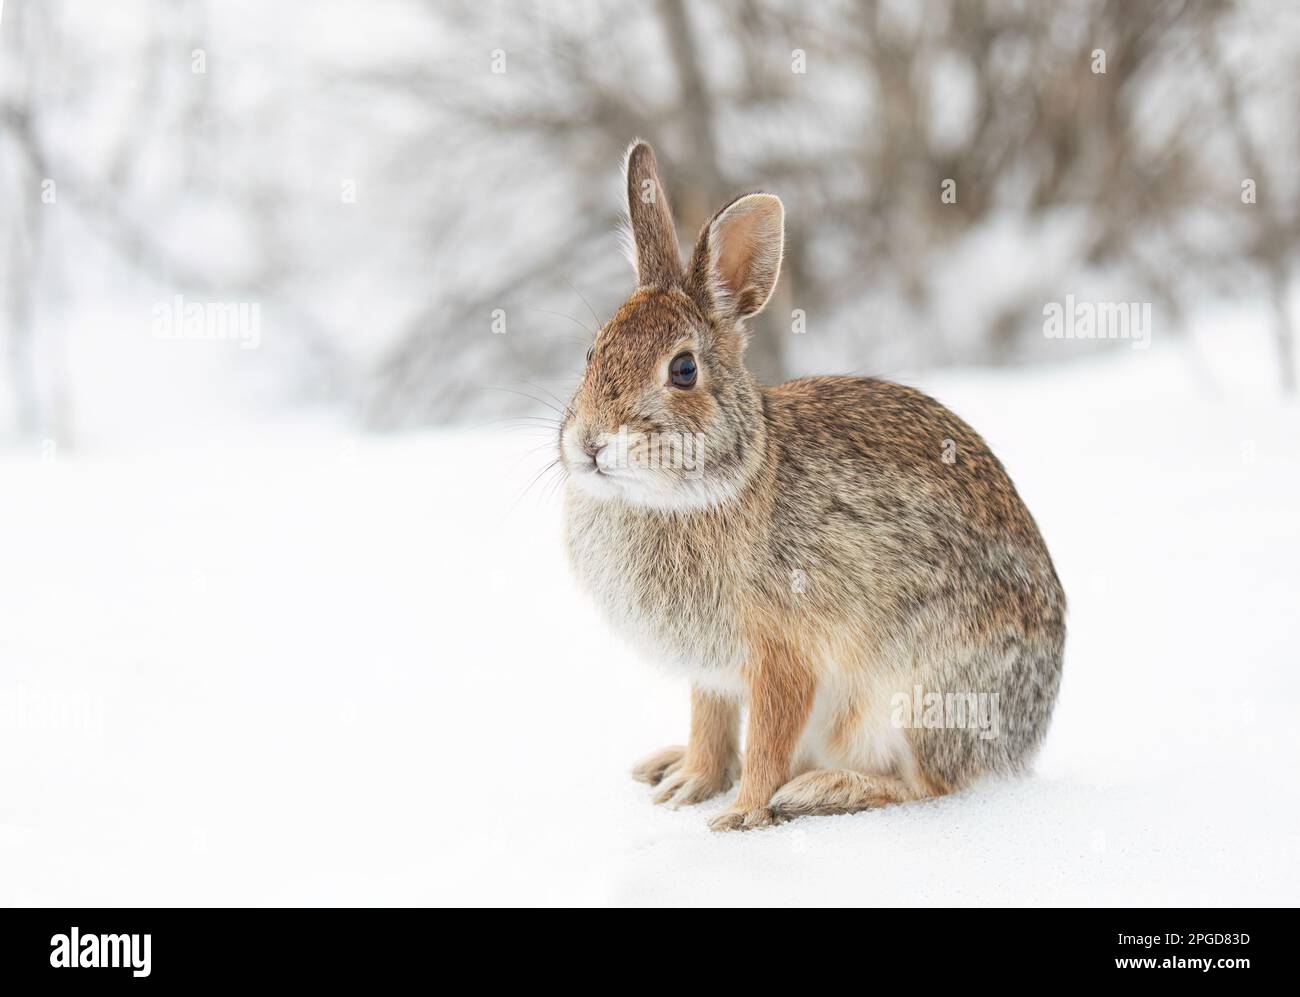 Eastern cottontail rabbit sitting in a winter forest. Stock Photo